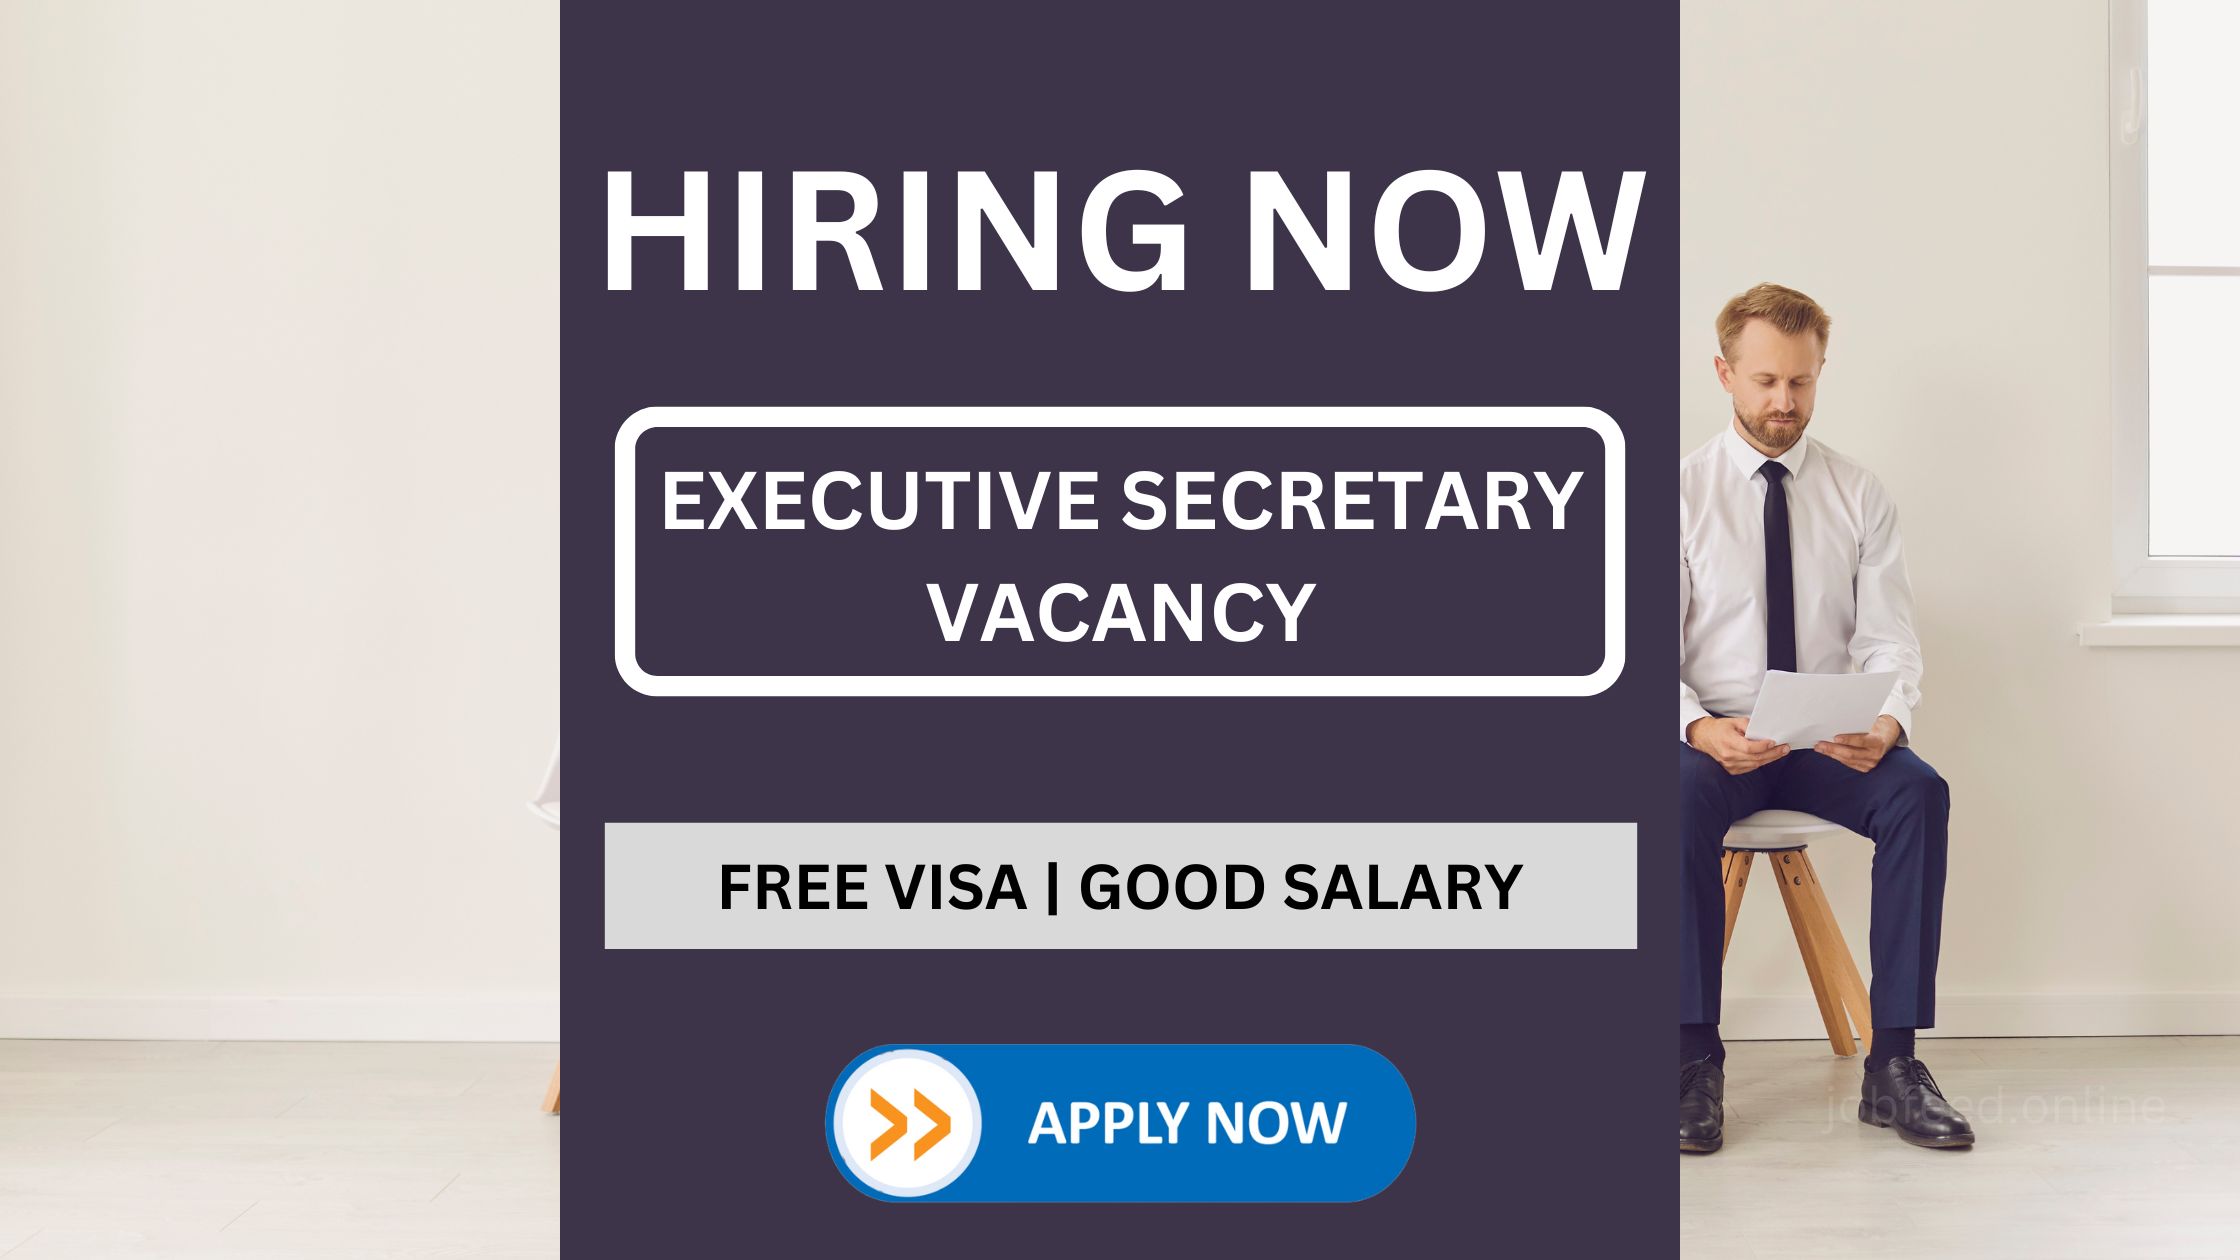 Executive Secretary Vacancy - 3 to 4 Years of Experienced Candidates can Apply